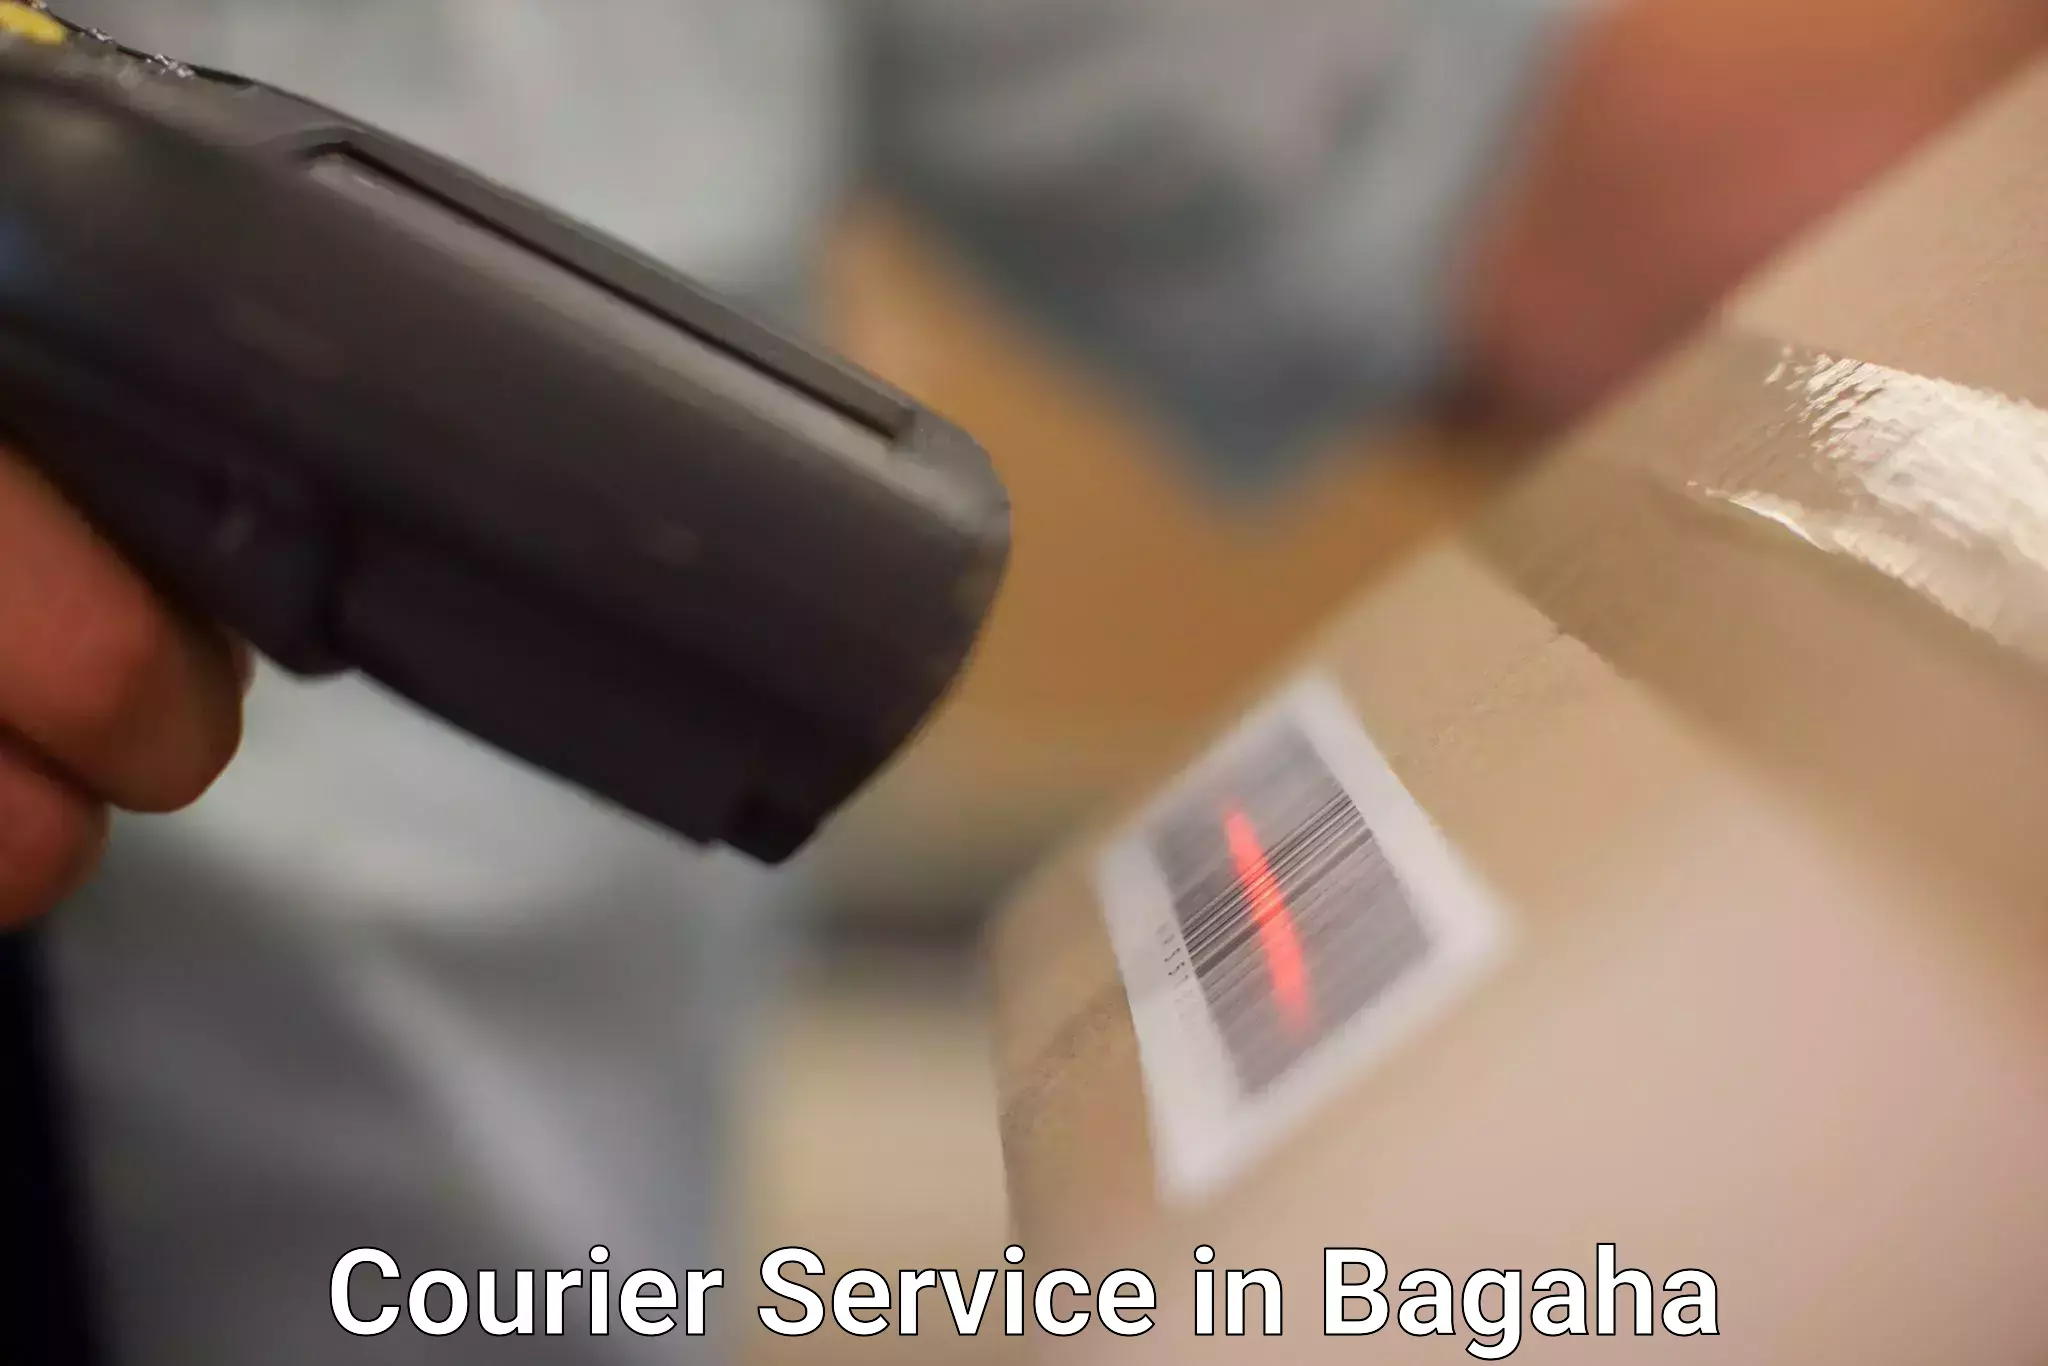 High value parcel delivery in Bagaha